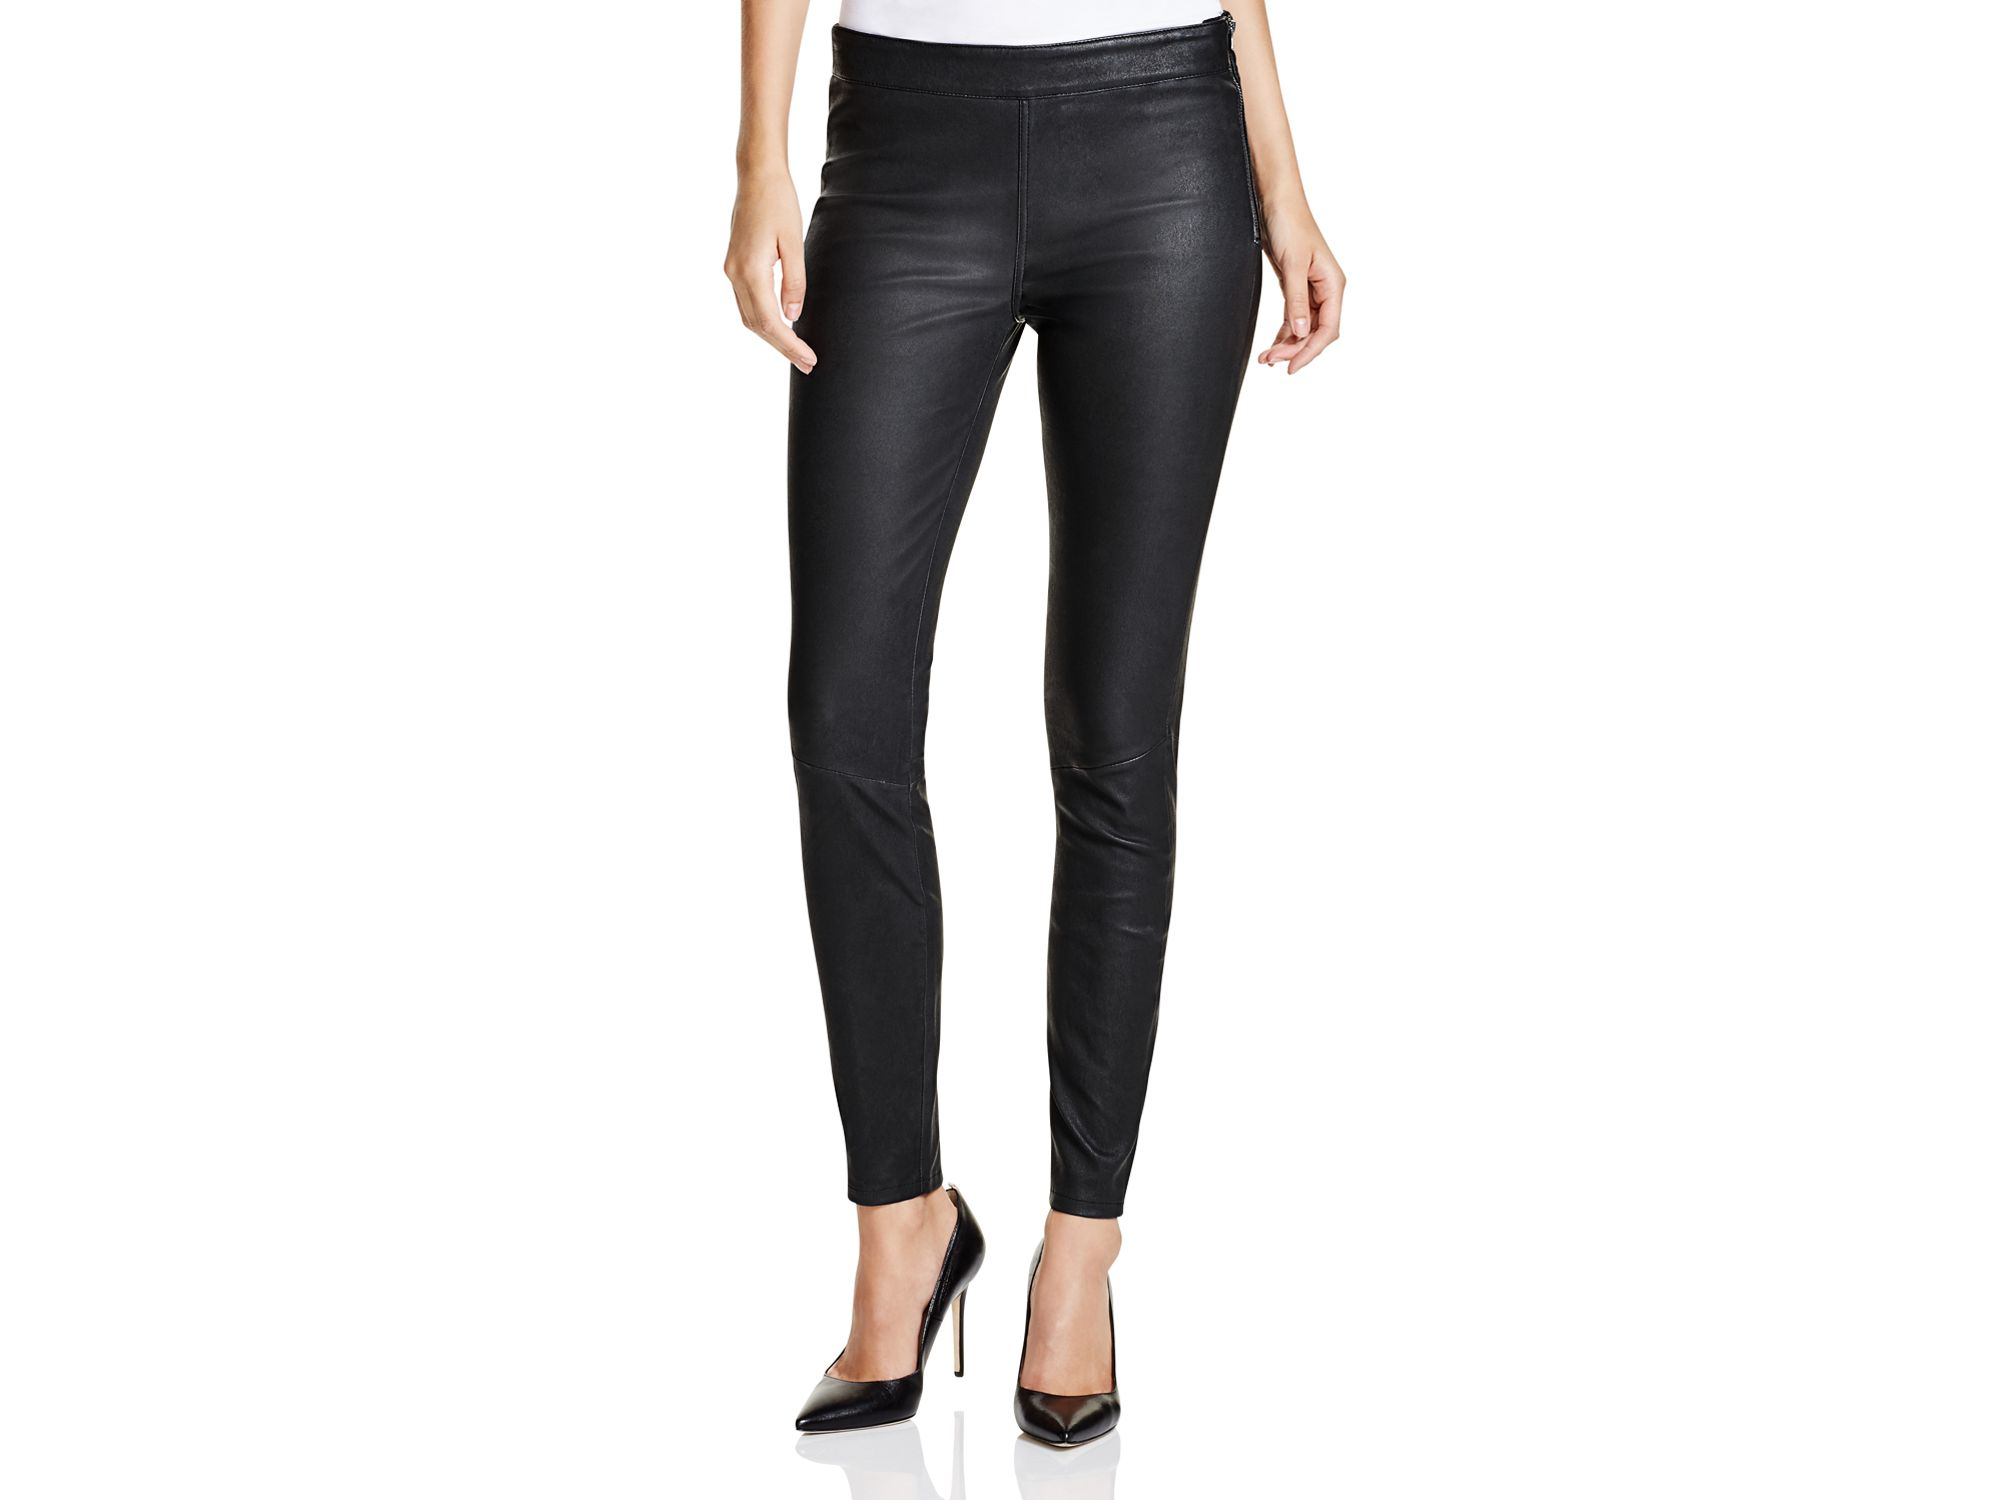 PAIGE Hoxton Leather High-rise Skinny Pants in Black - Lyst